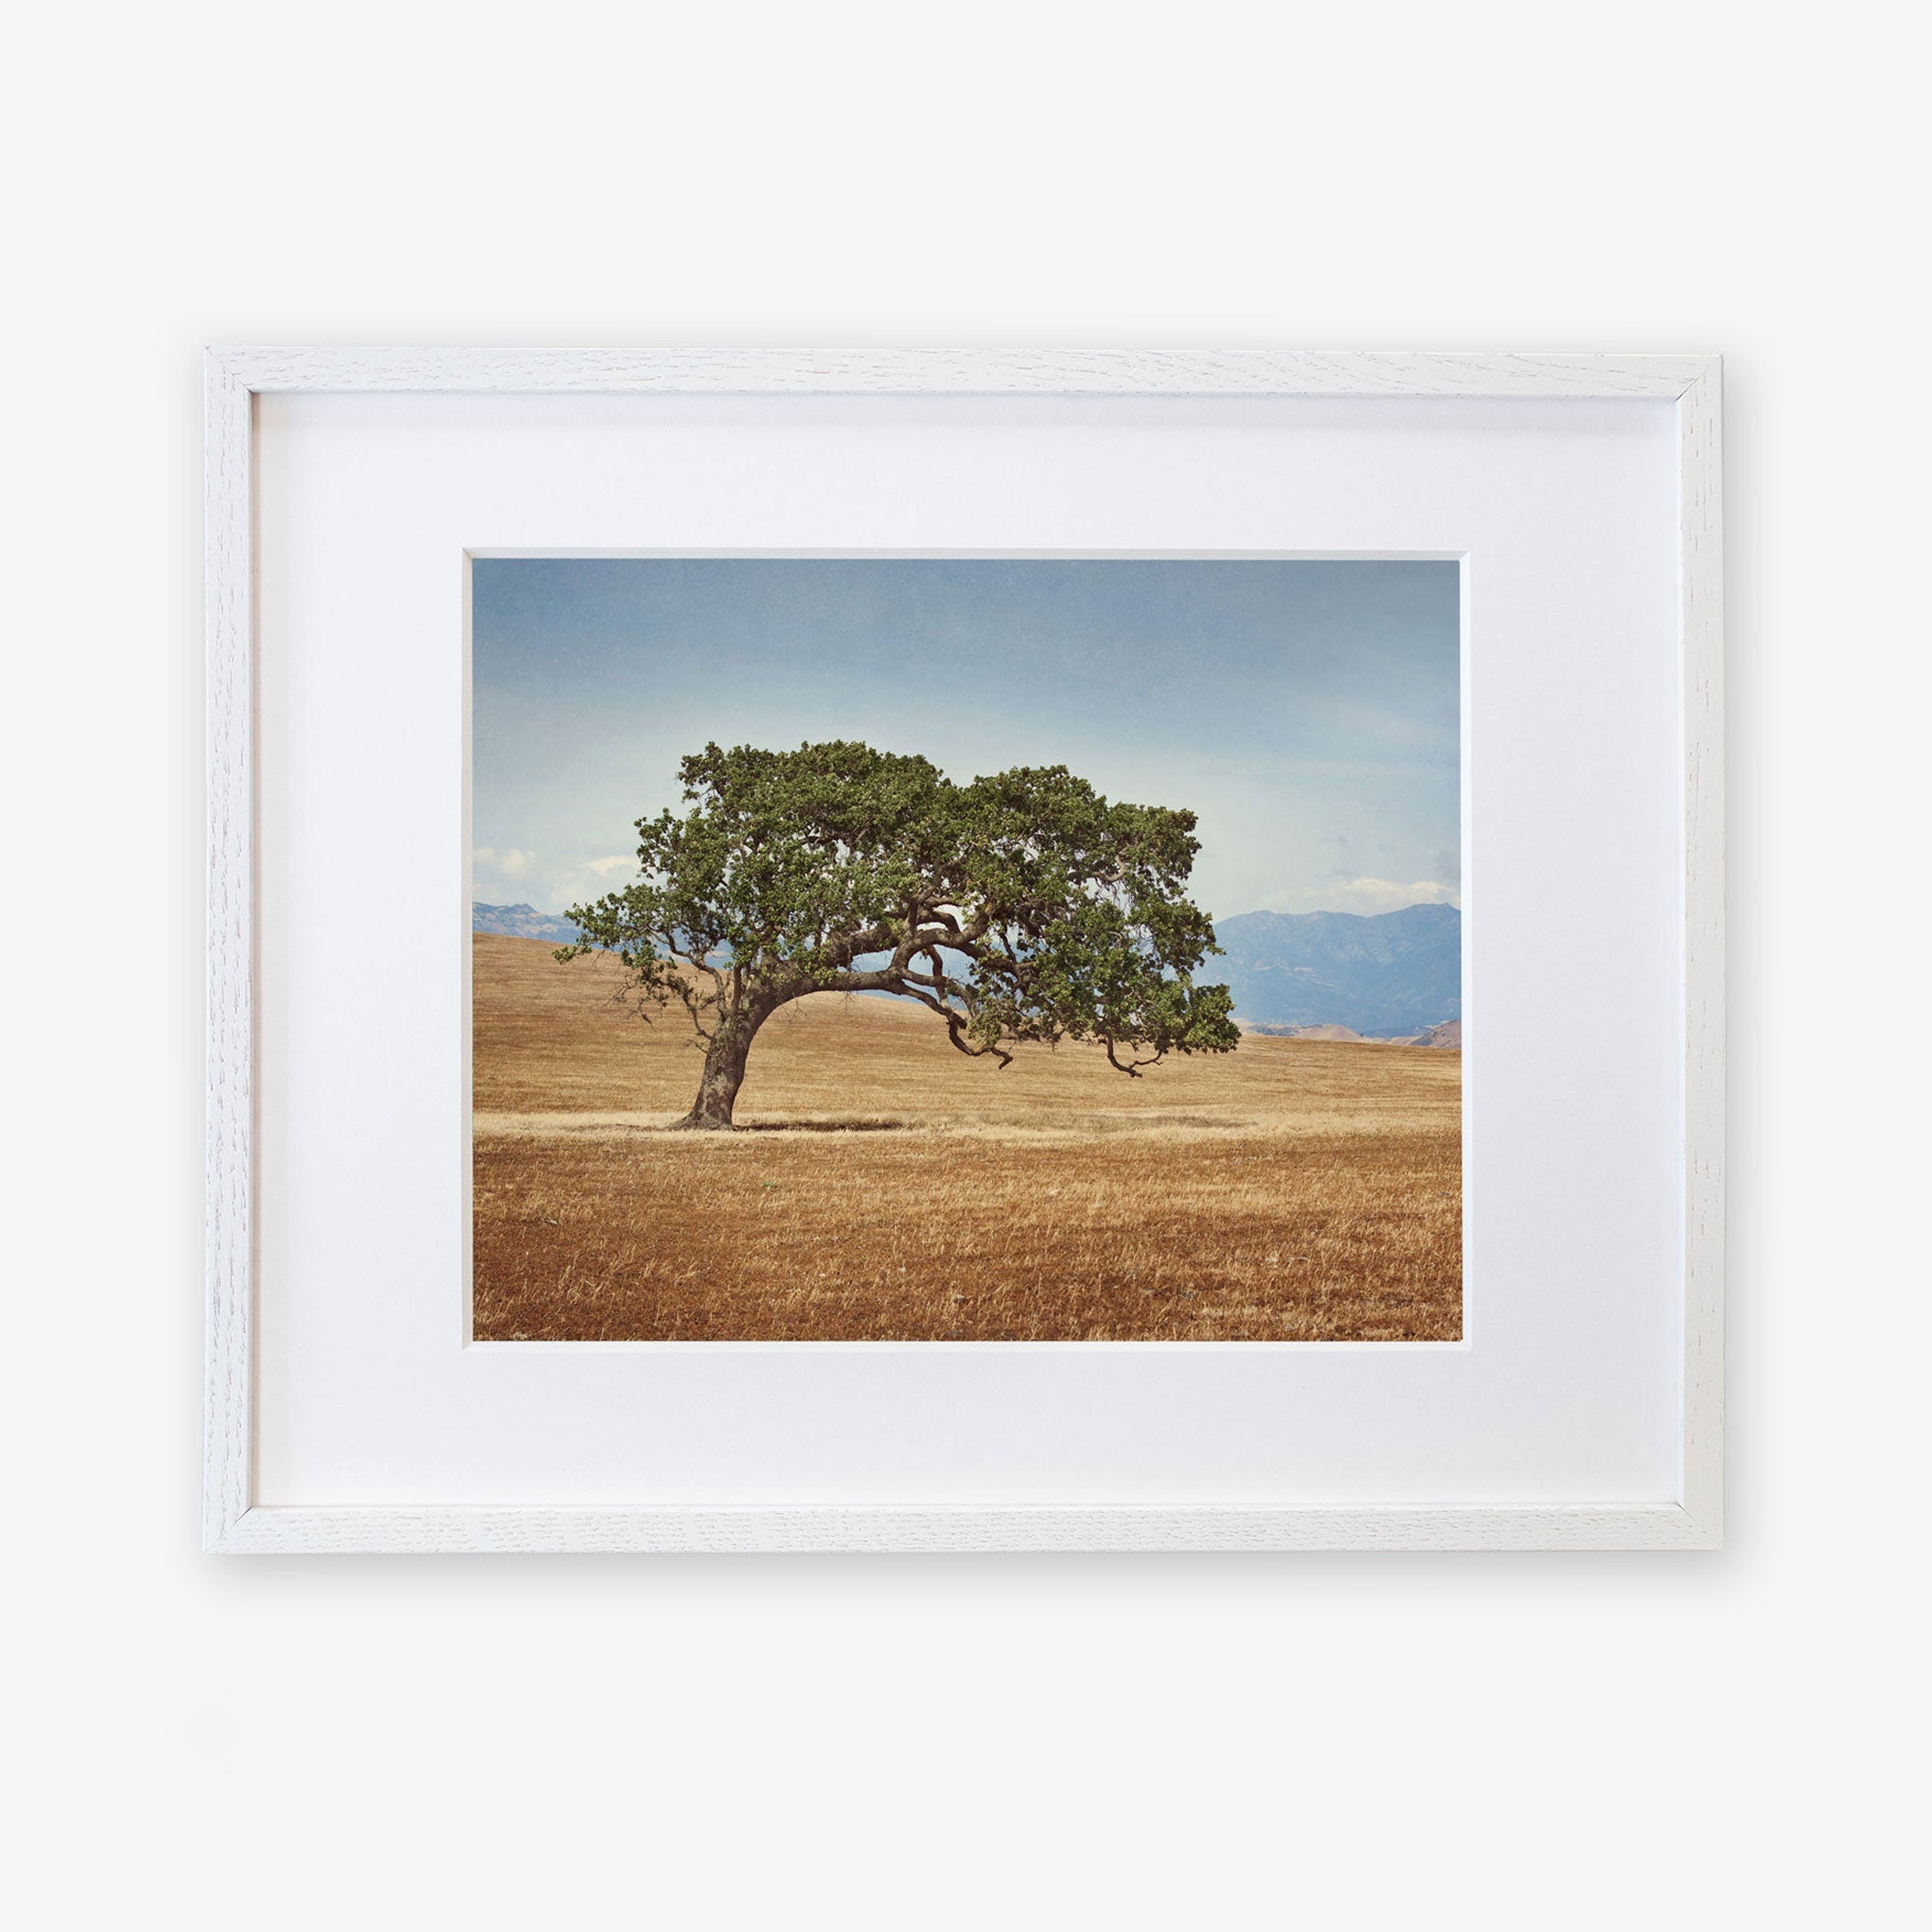 Framed photograph of a solitary California Oak Tree Print, &#39;Windswept&#39; in a dry grassland with distant mountains under a clear sky, displayed on archival photographic paper on a white background by Offley Green.